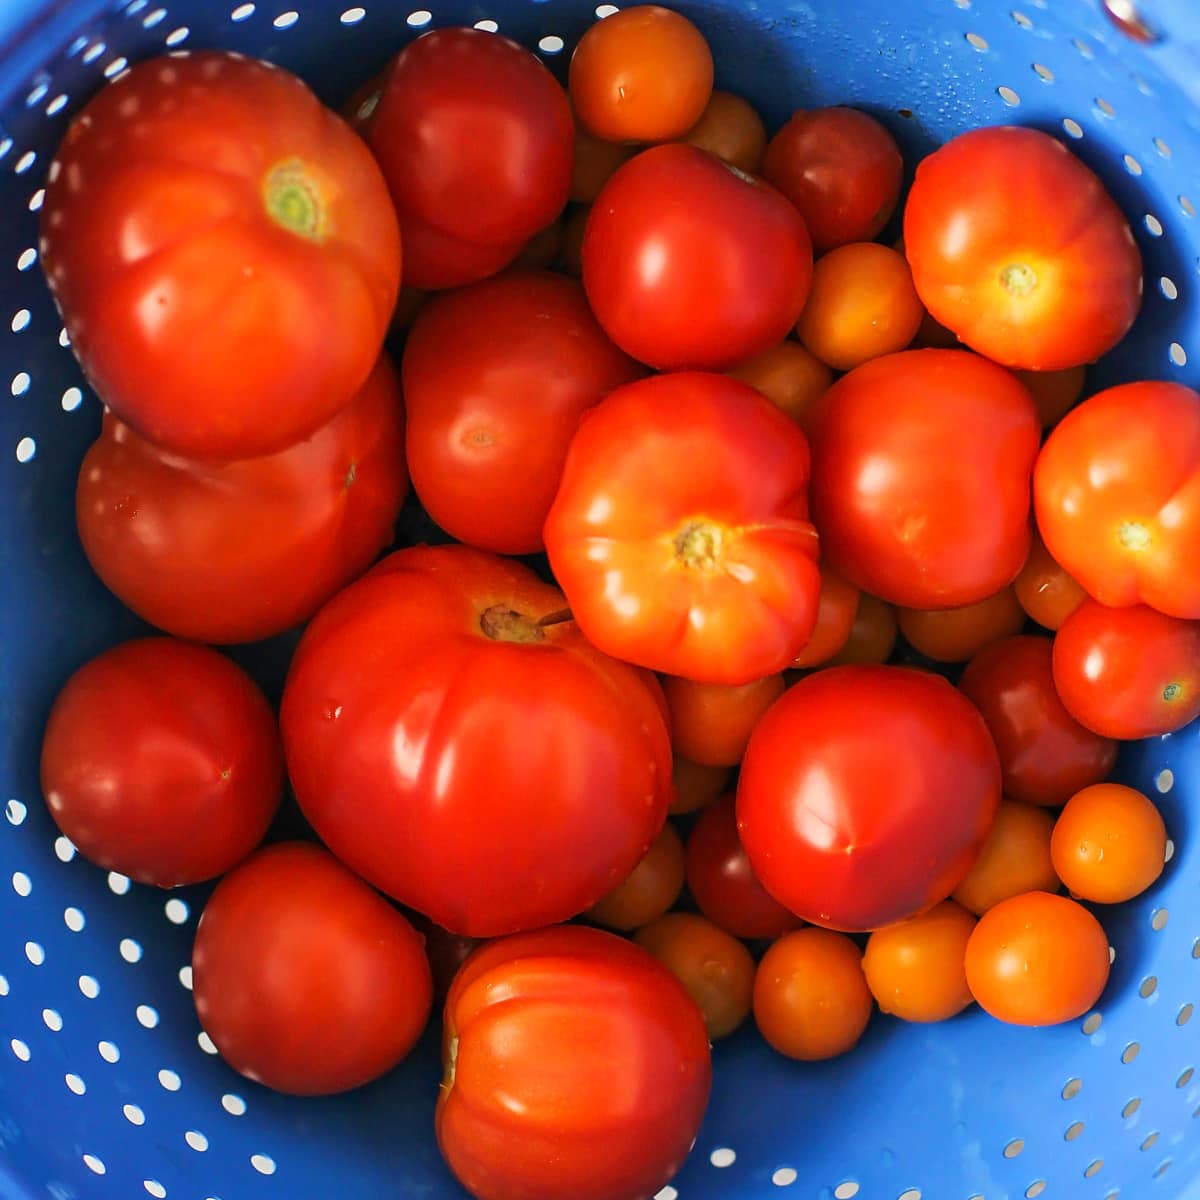 Washed tomatoes in a colander ready for making soup.